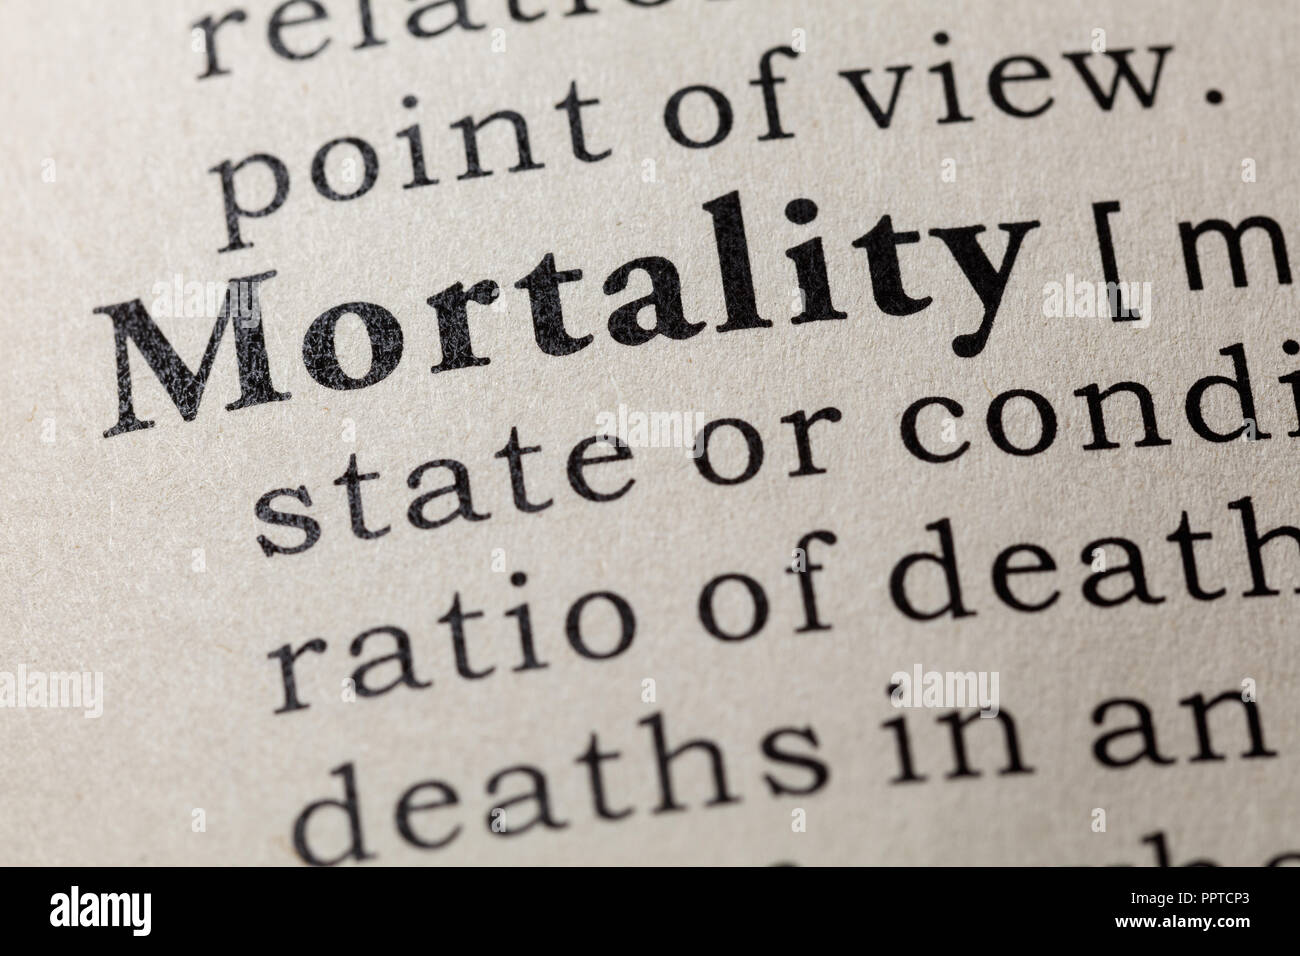 Fake Dictionary, Dictionary definition of the word mortality. including key descriptive words. Stock Photo